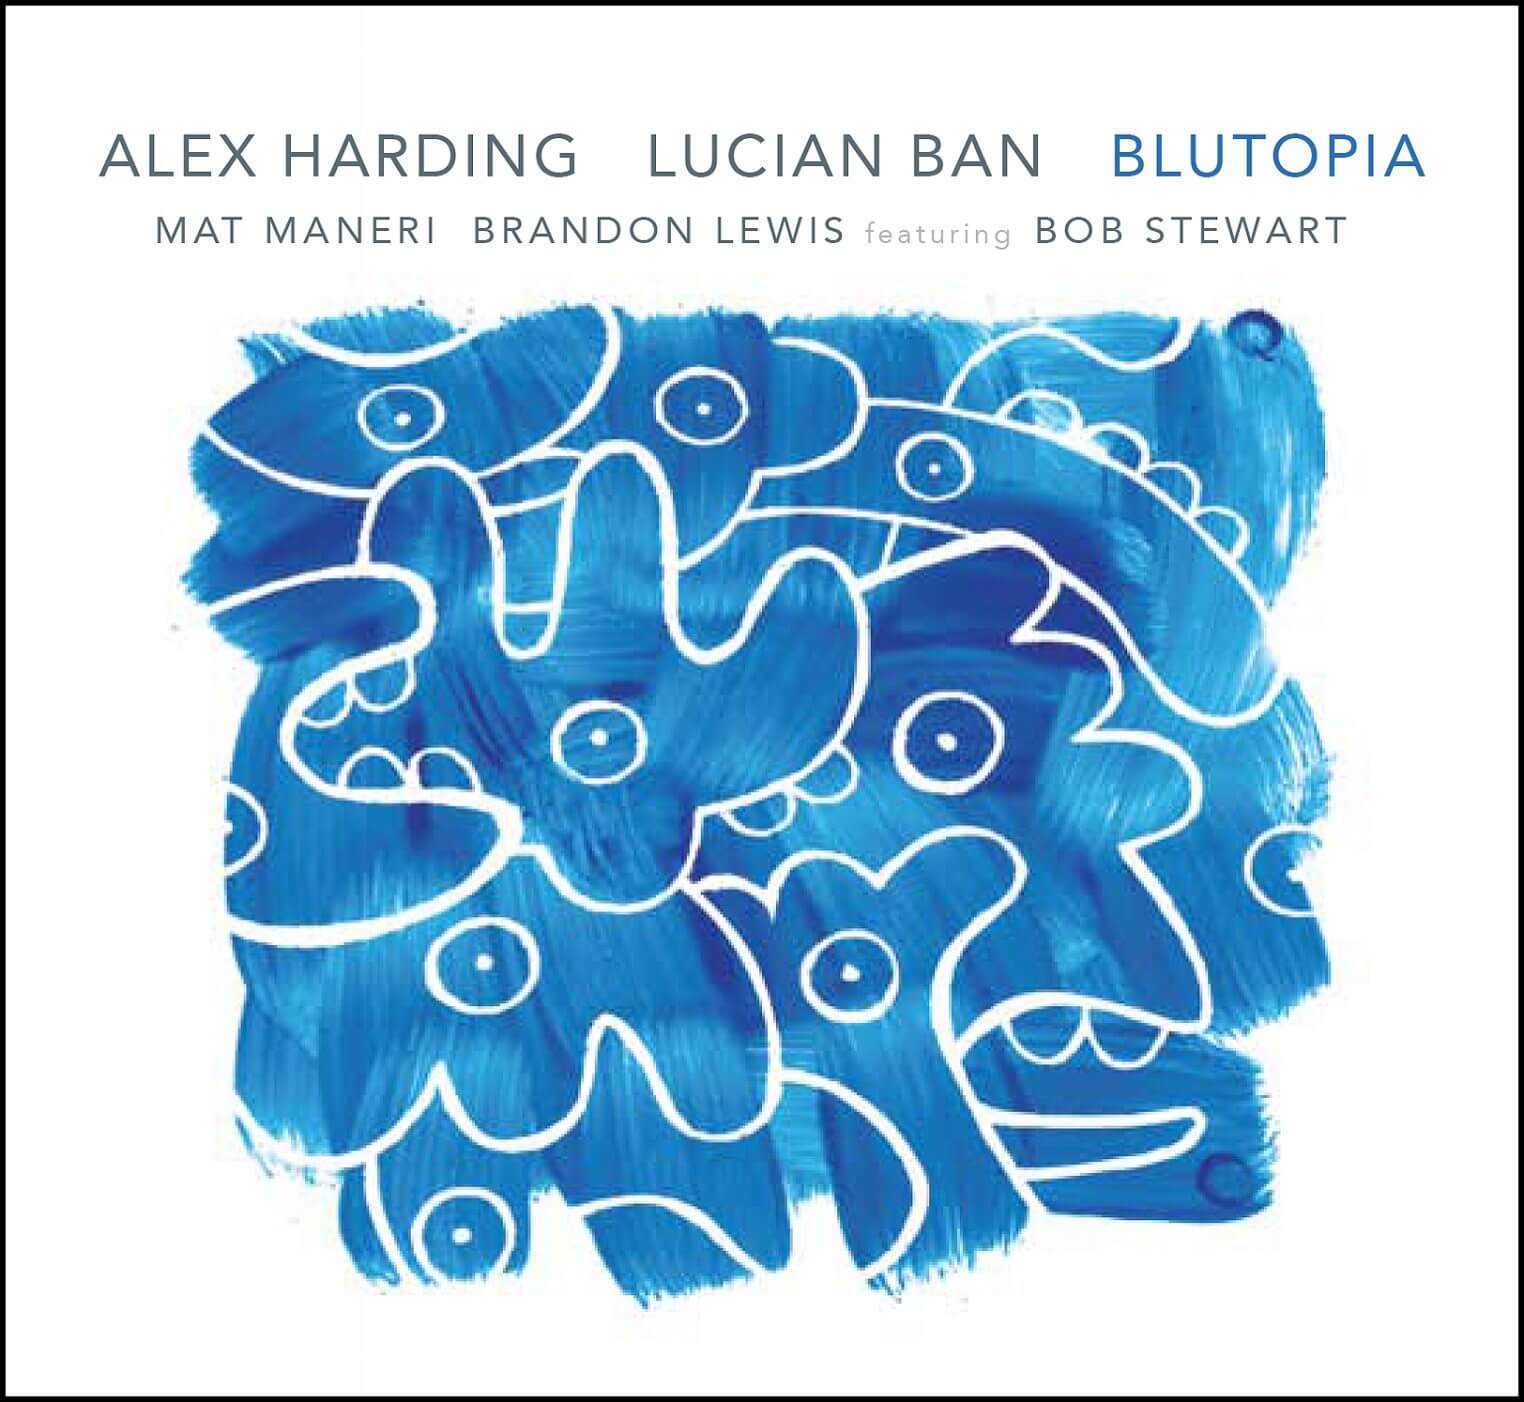 Blutopia CD Front Cover